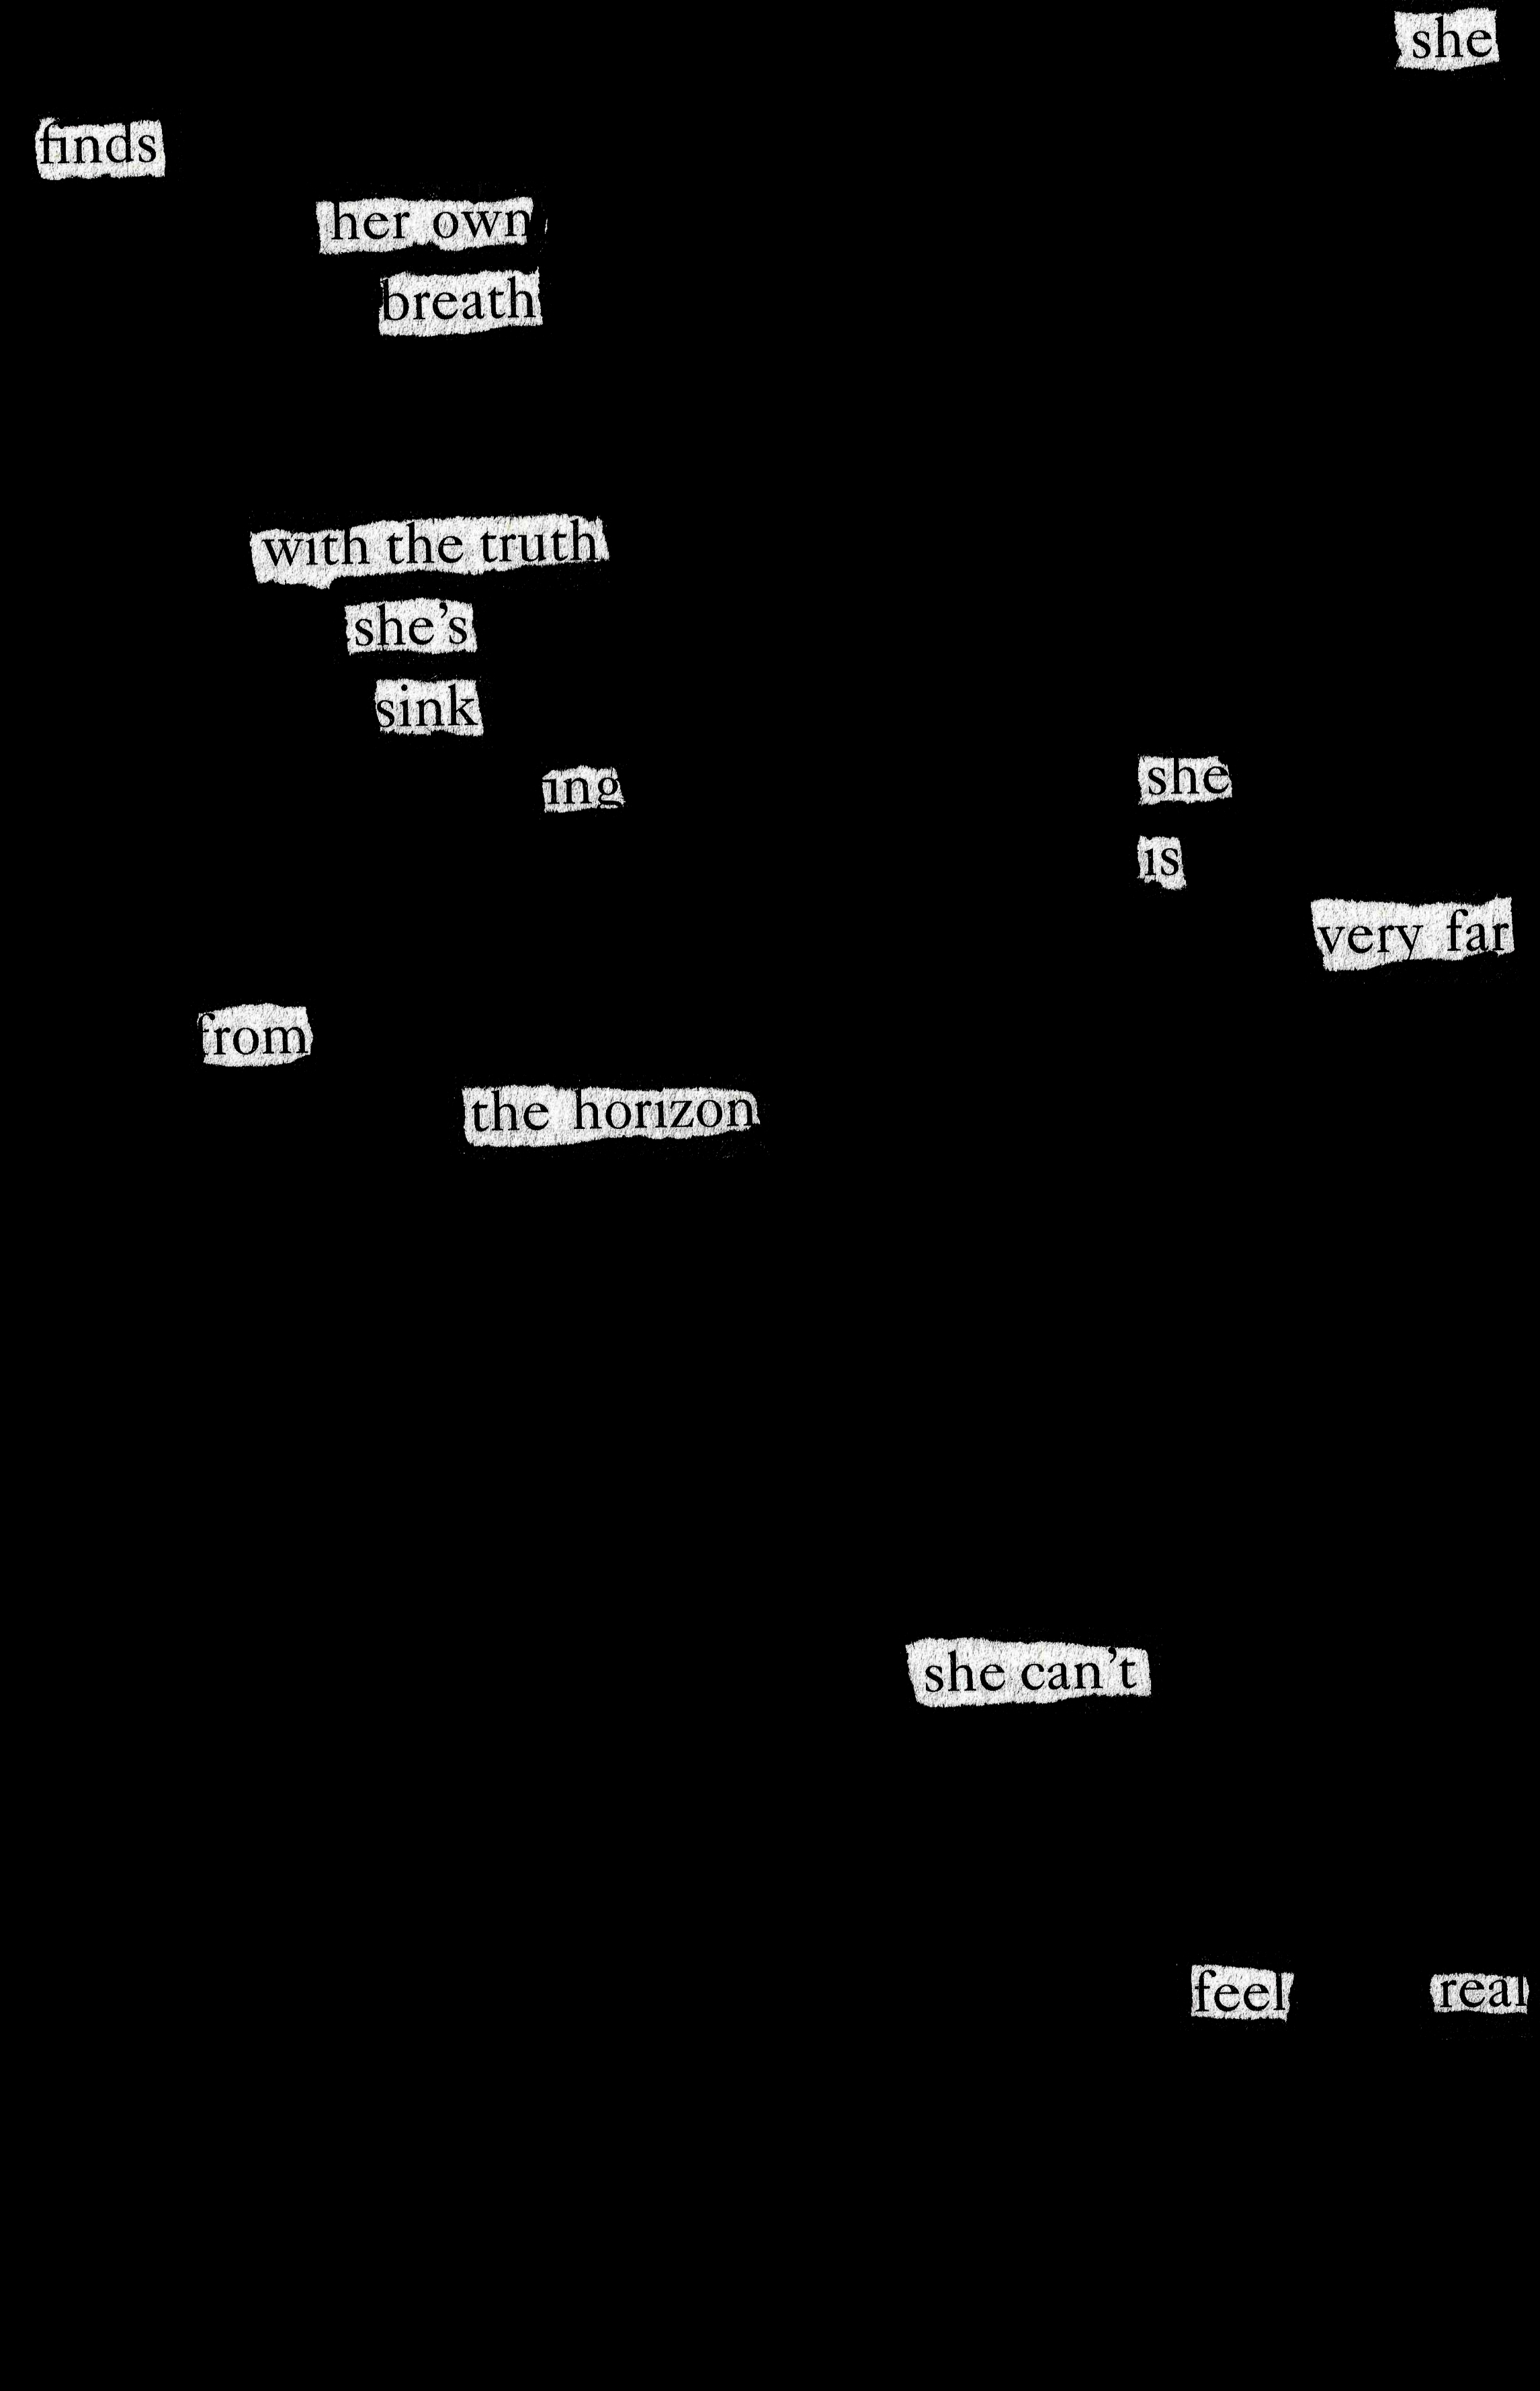 blackout poetry: she finds her own breath / with the truth she's sinking / she is very far from the horizon / she can't feel real